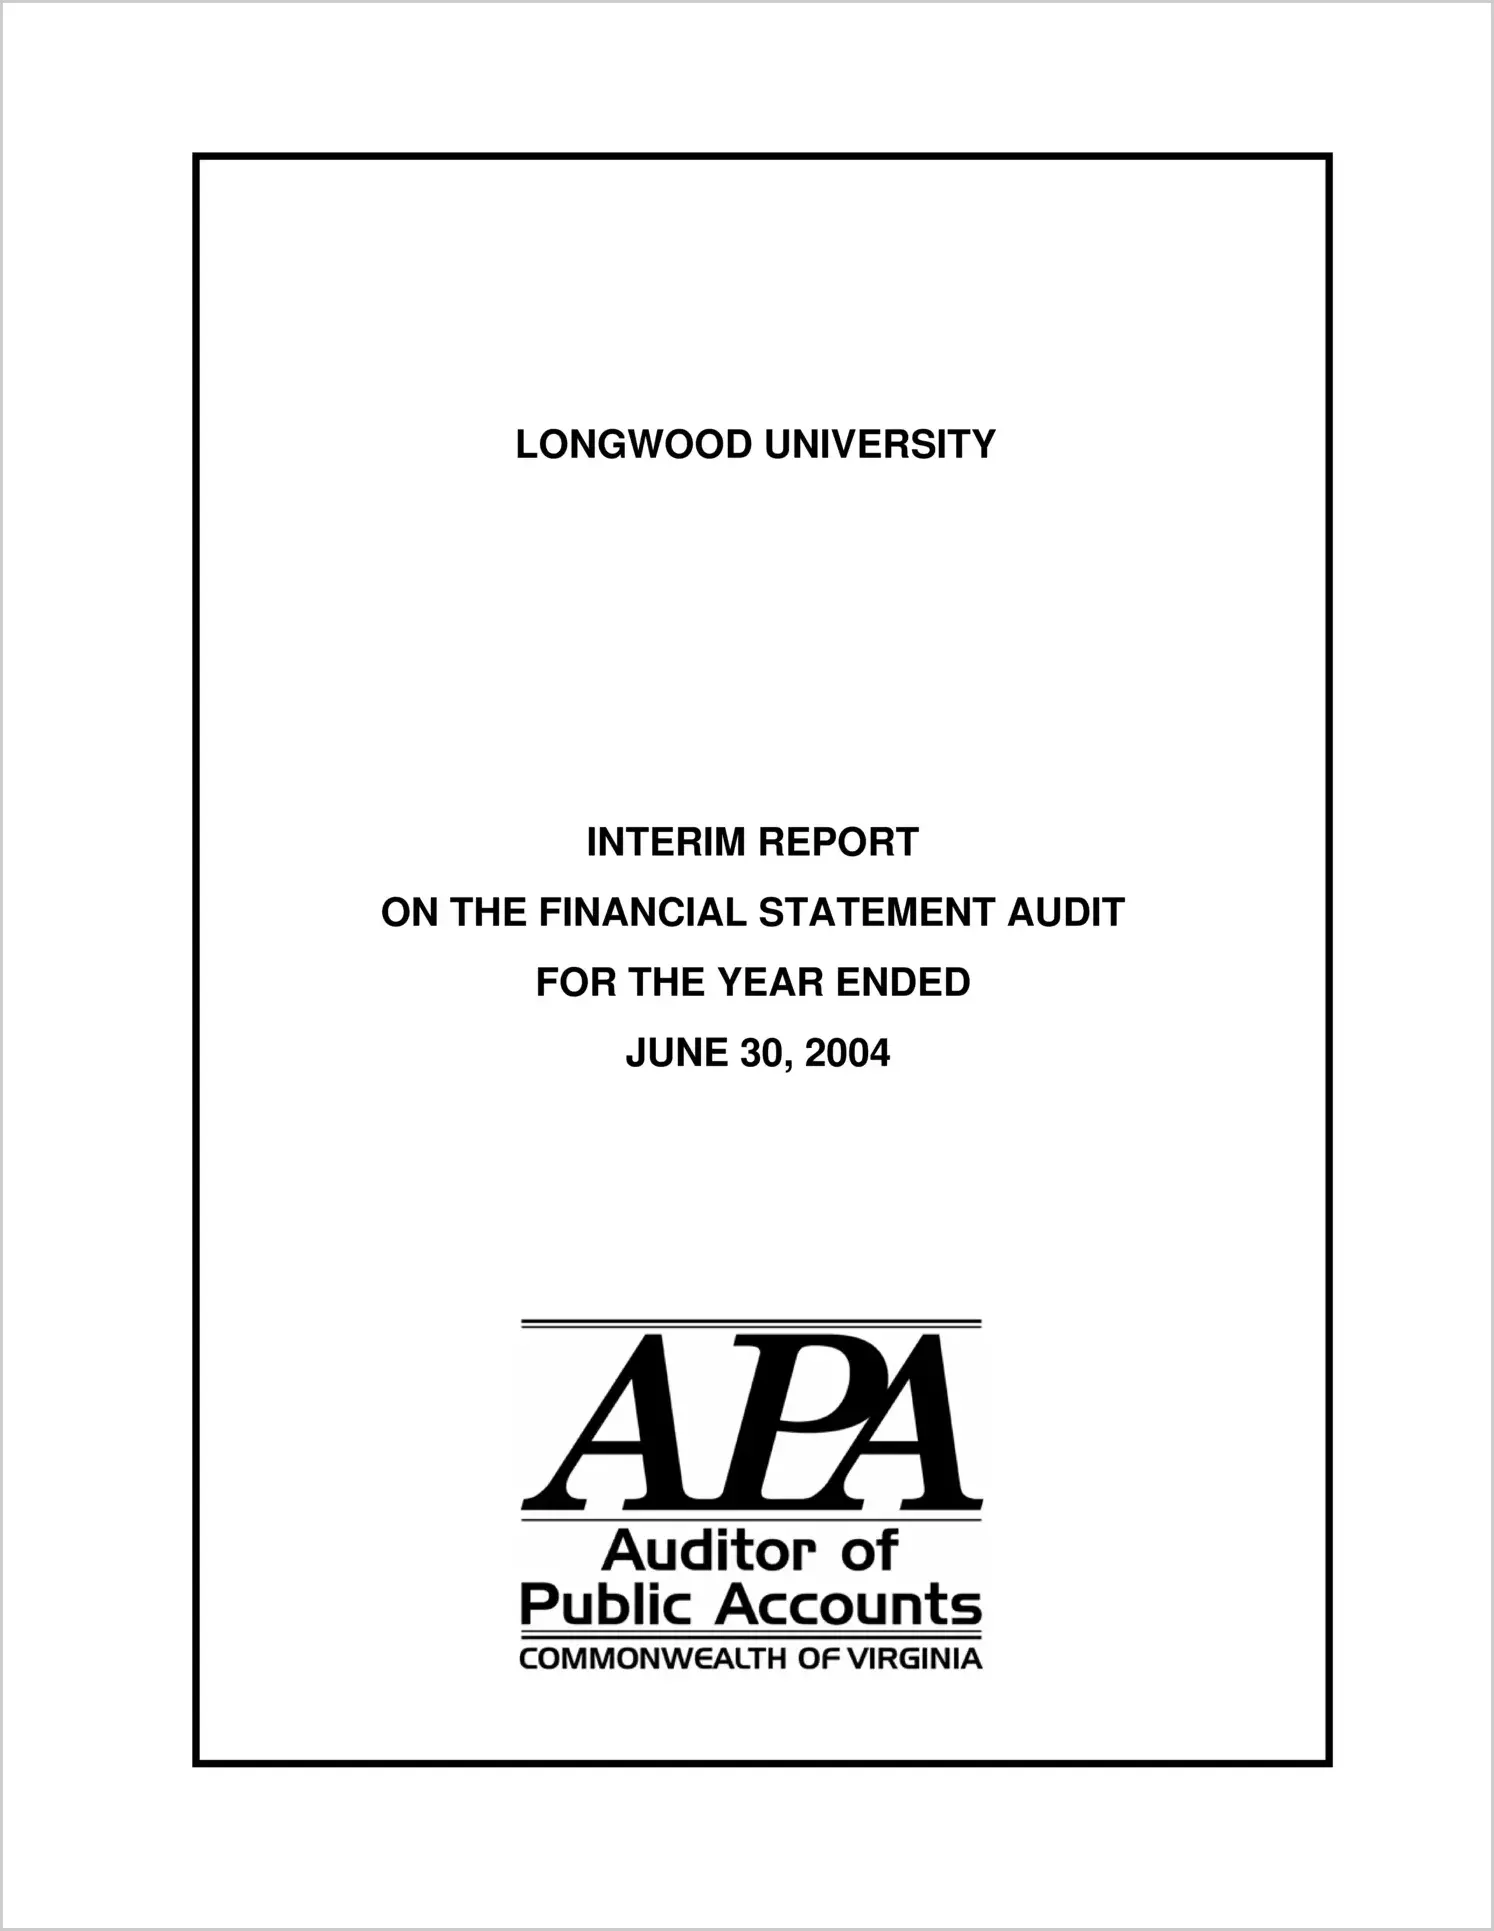 Longwood University Interim Report on the Financial Statement Audit for the year ended June 30, 2004